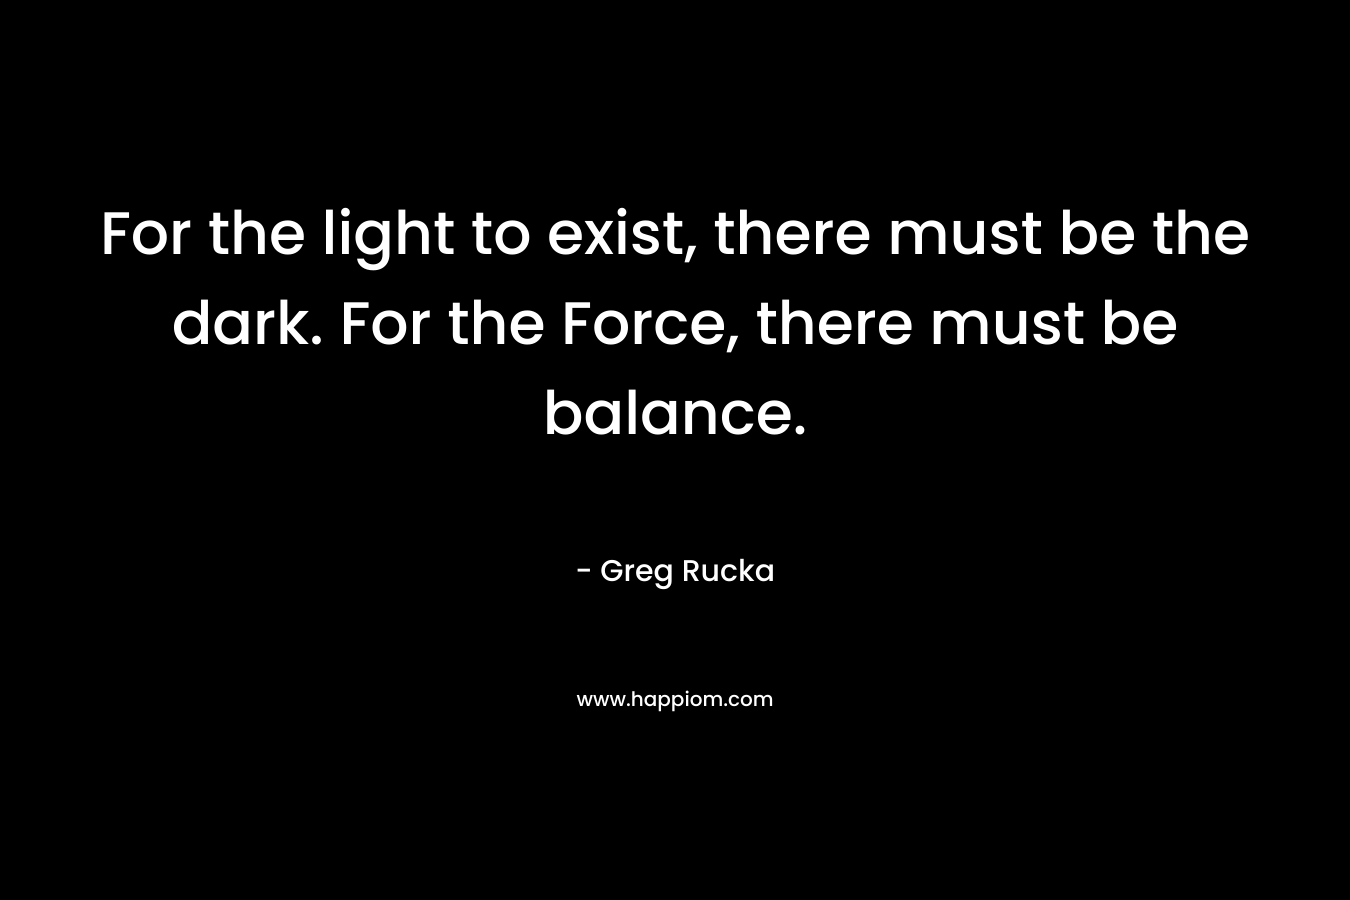 For the light to exist, there must be the dark. For the Force, there must be balance.